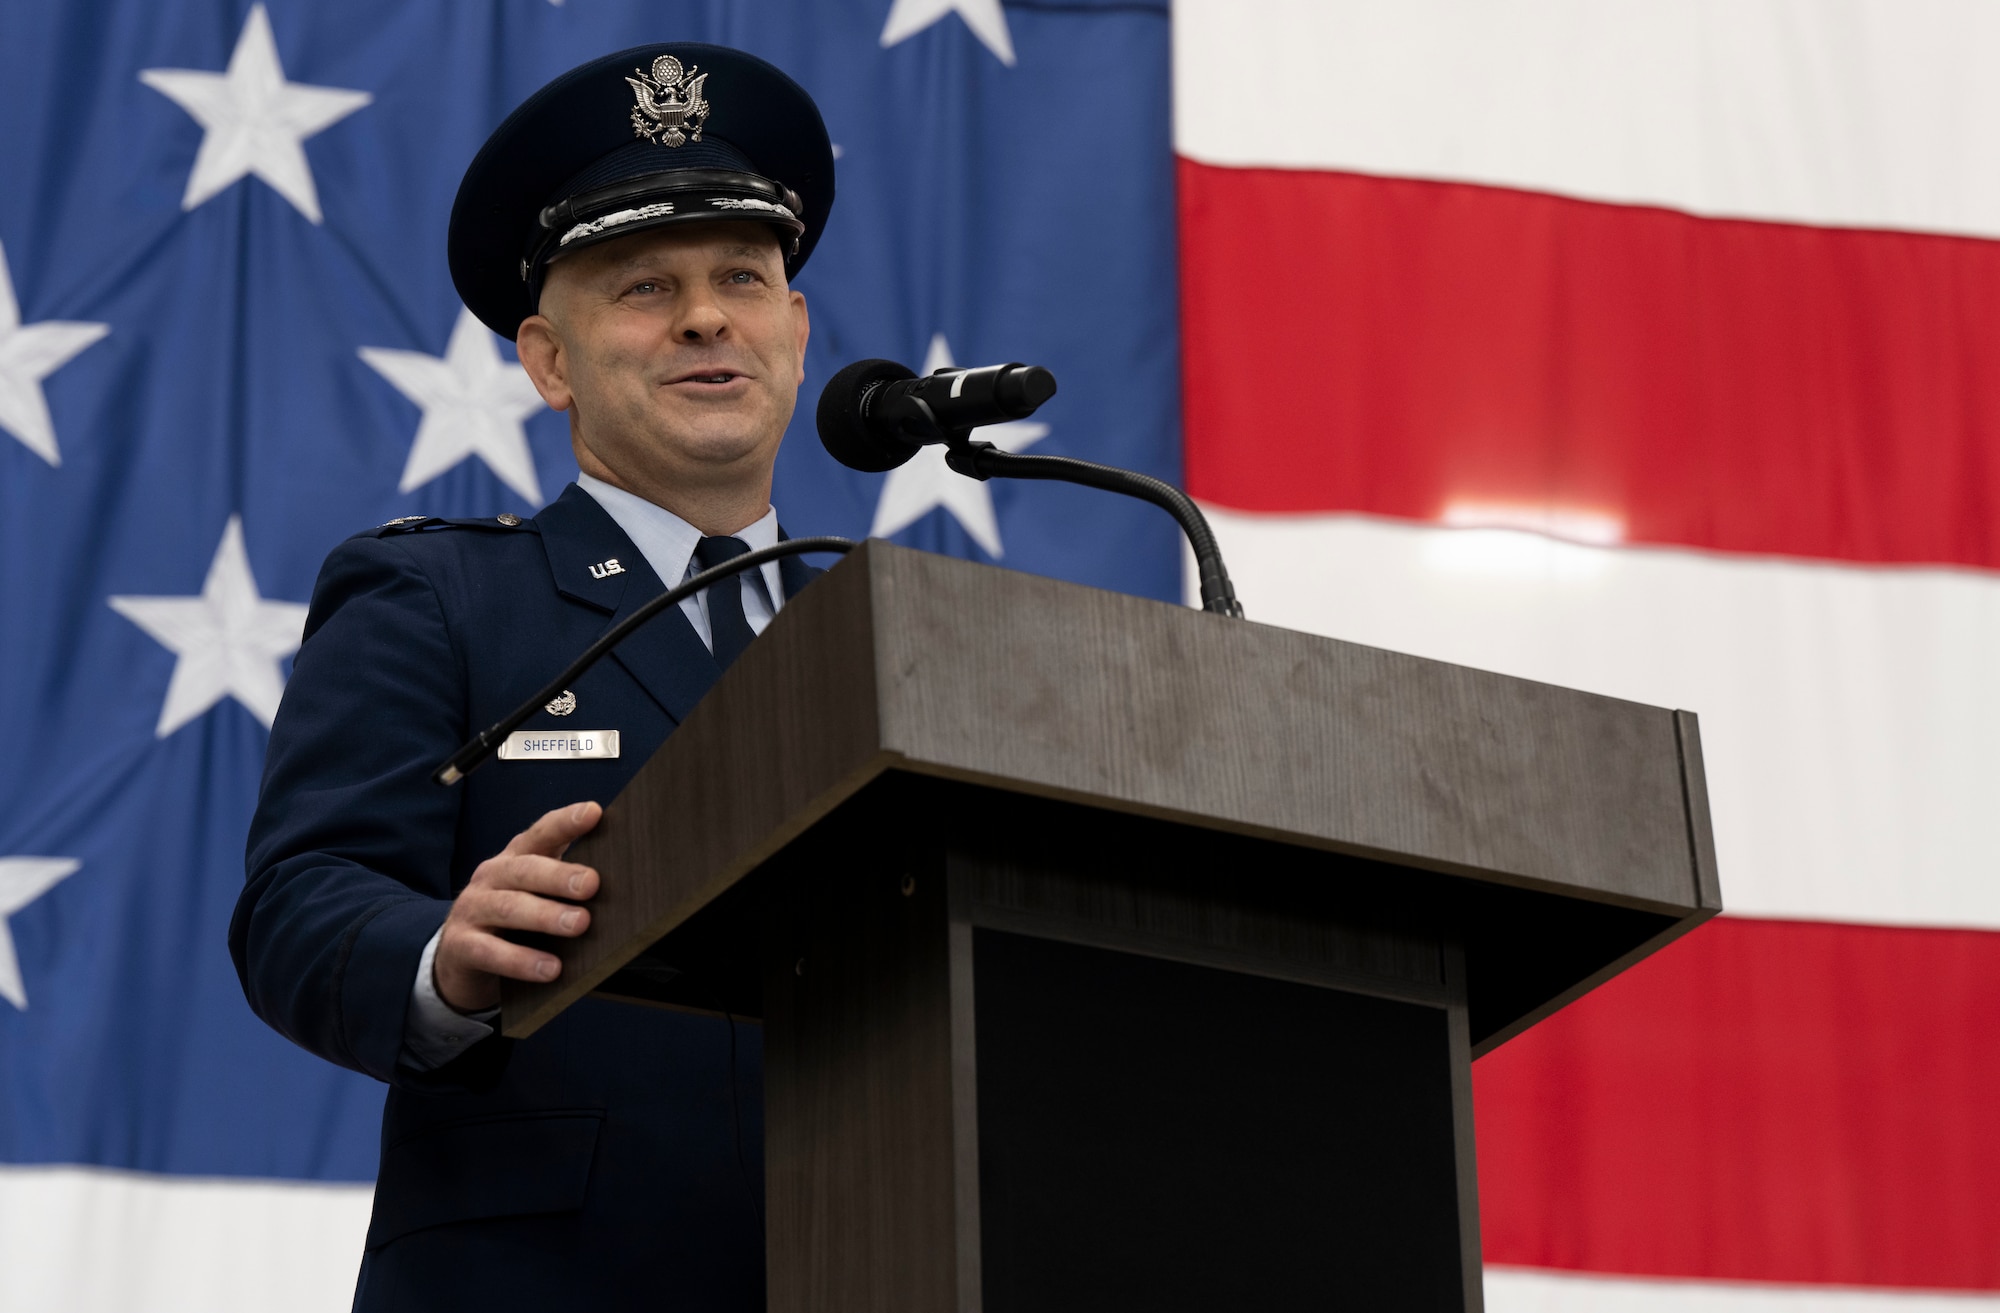 U.S. Air Force Col. Joseph L. Sheffield, outgoing commander of the 28th Bomb Wing, gives a speech during a change of command ceremony at Ellsworth Air Force Base, South Dakota, June 23, 2023.